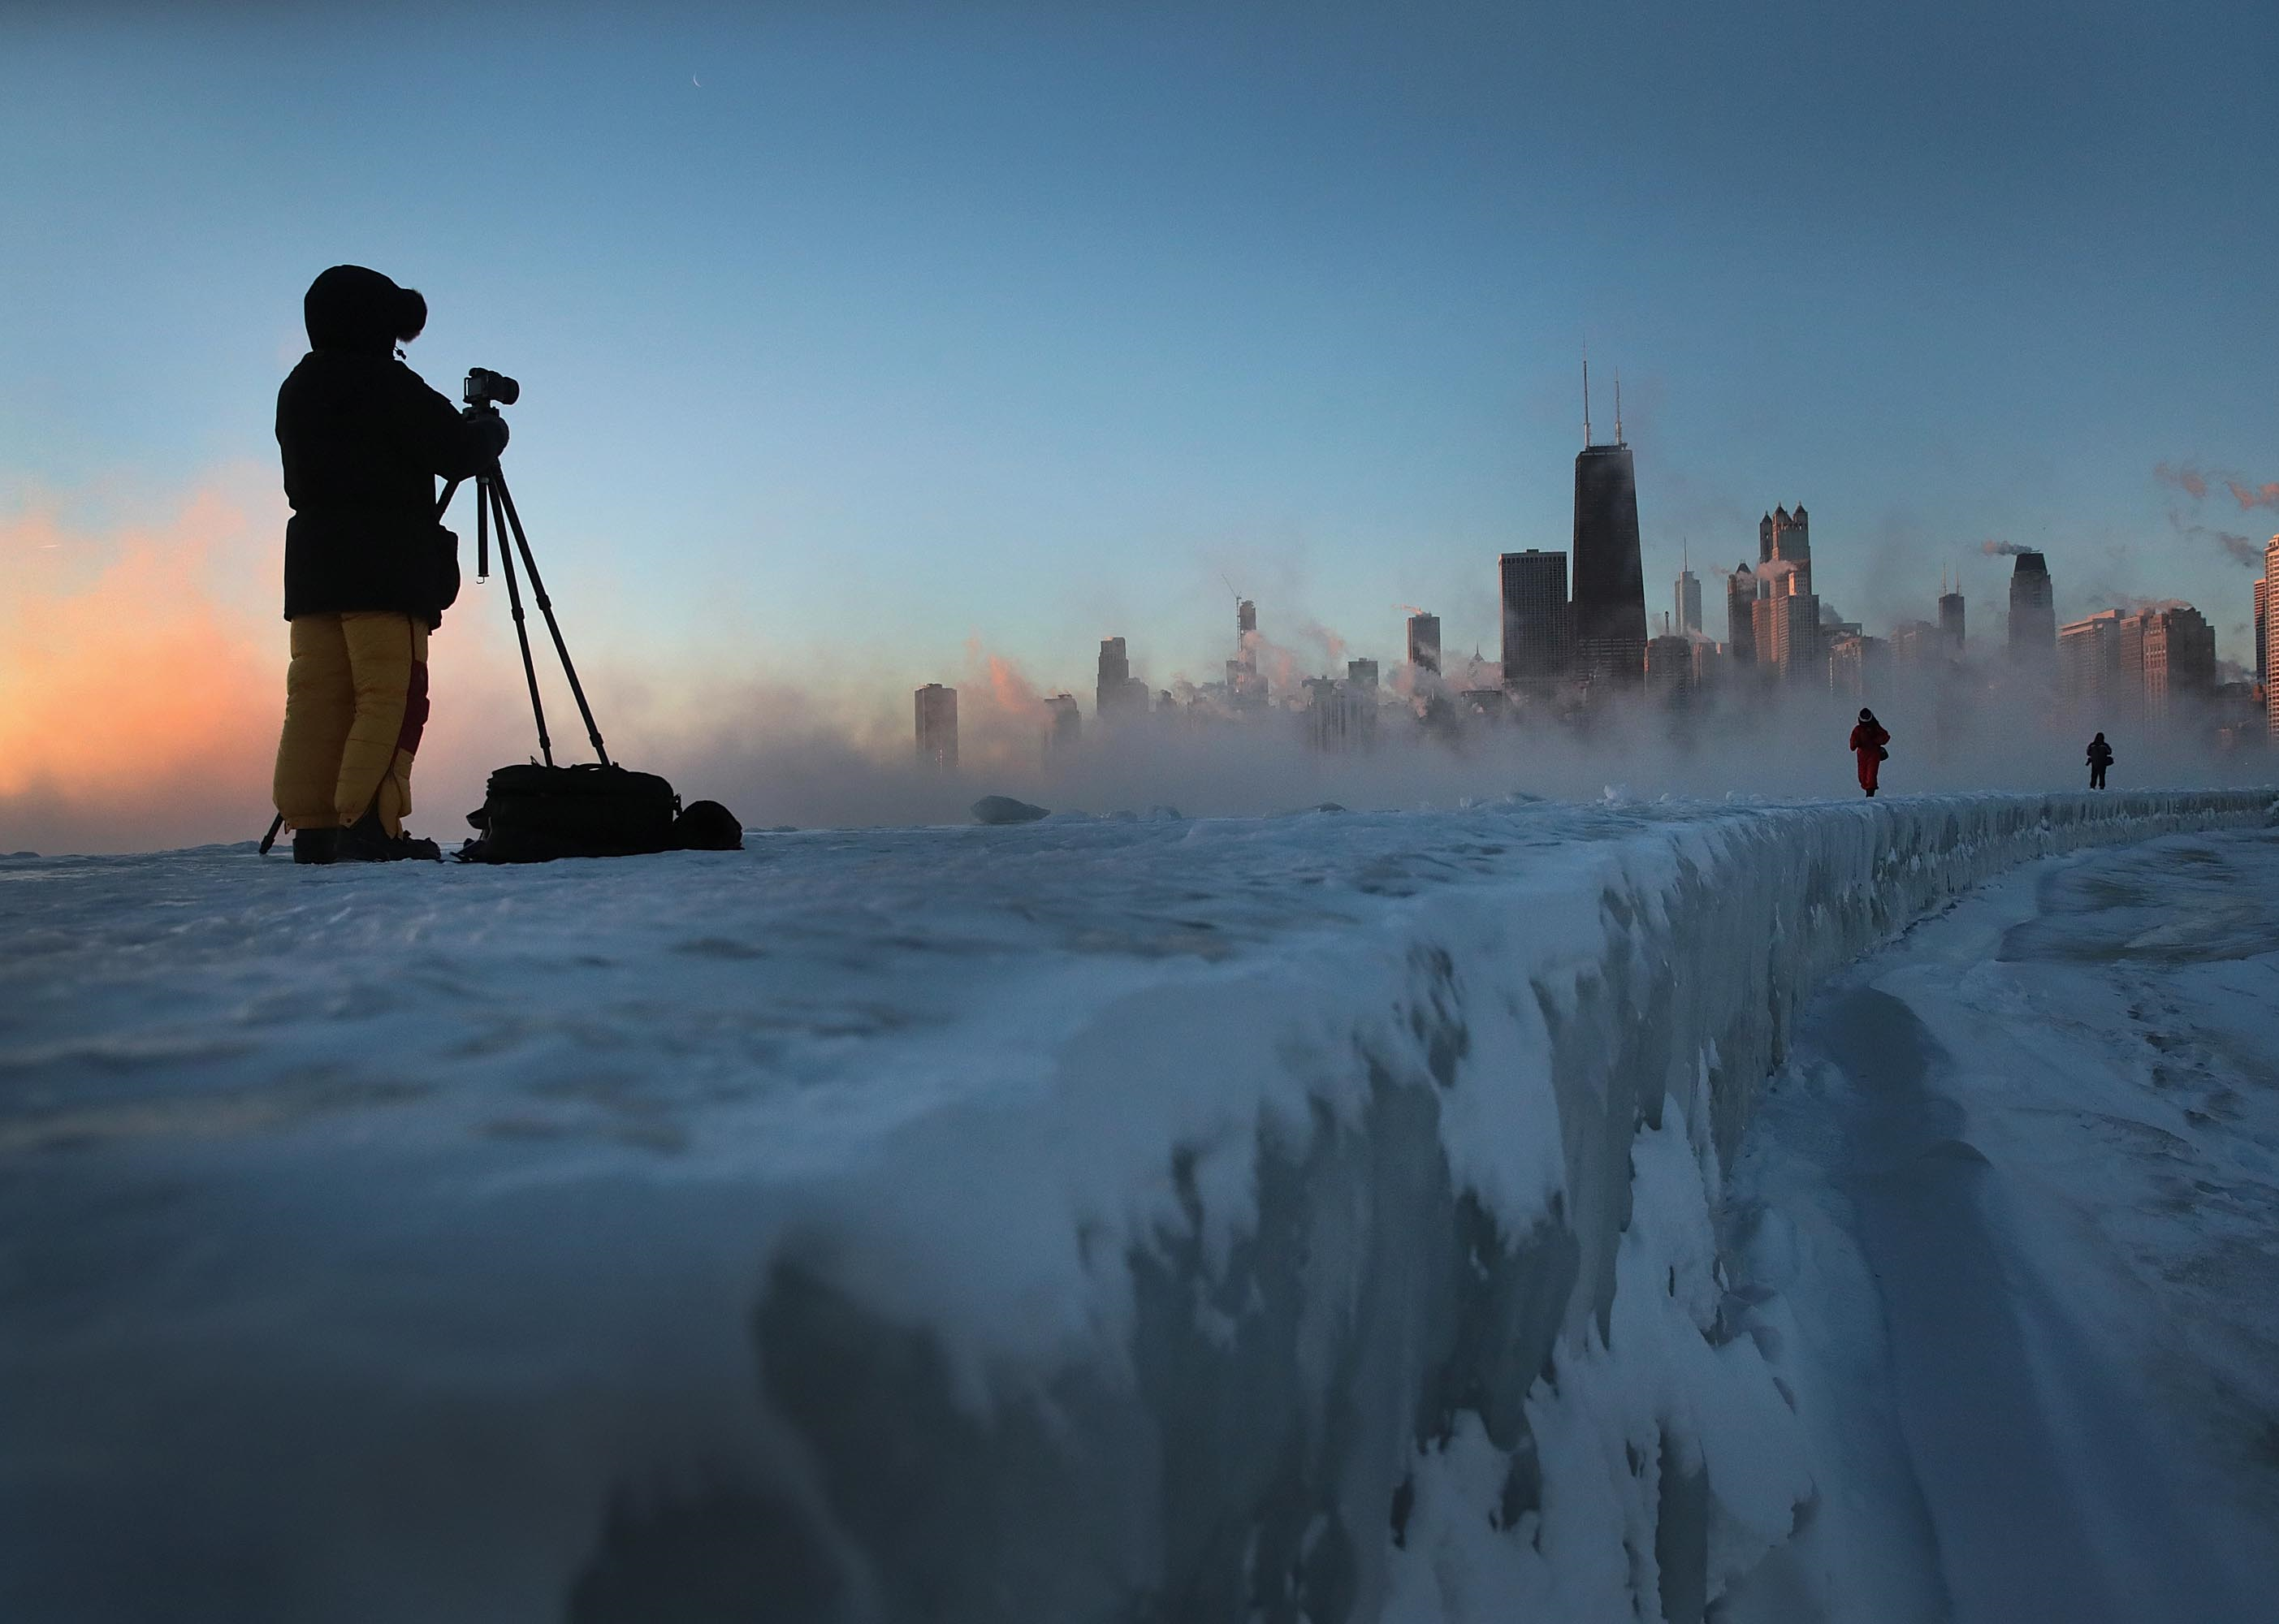 A photographer standing on ice trying to catch a photo of the sunrise over downtown Chicago.